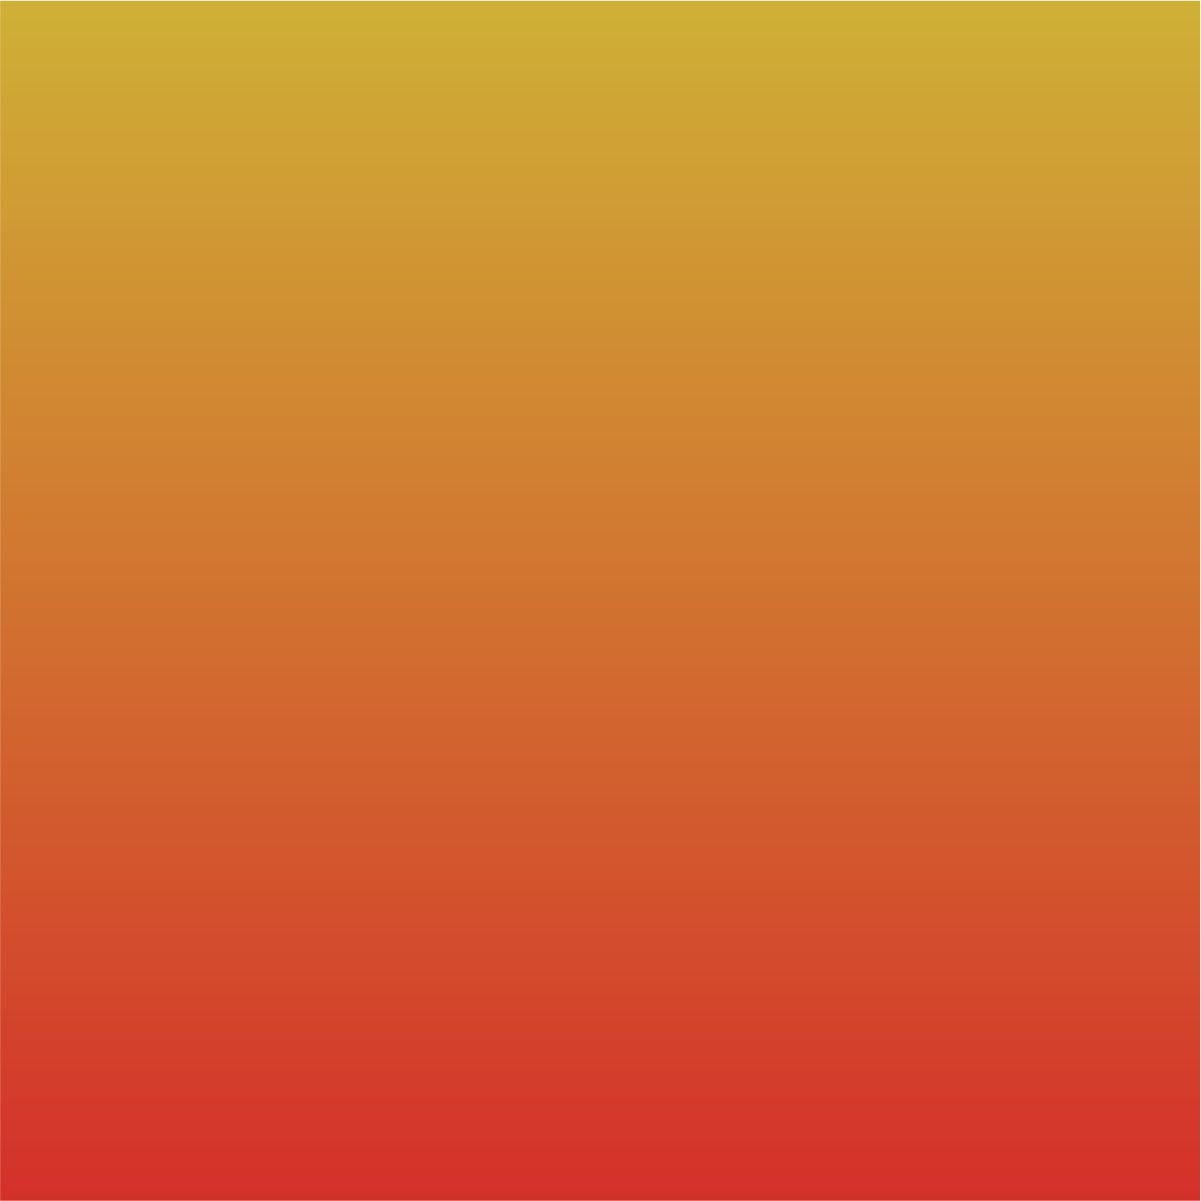 Color Changing Hot Red Specialty PSV 12in x 15in (Permanent Adhesive Vinyl)